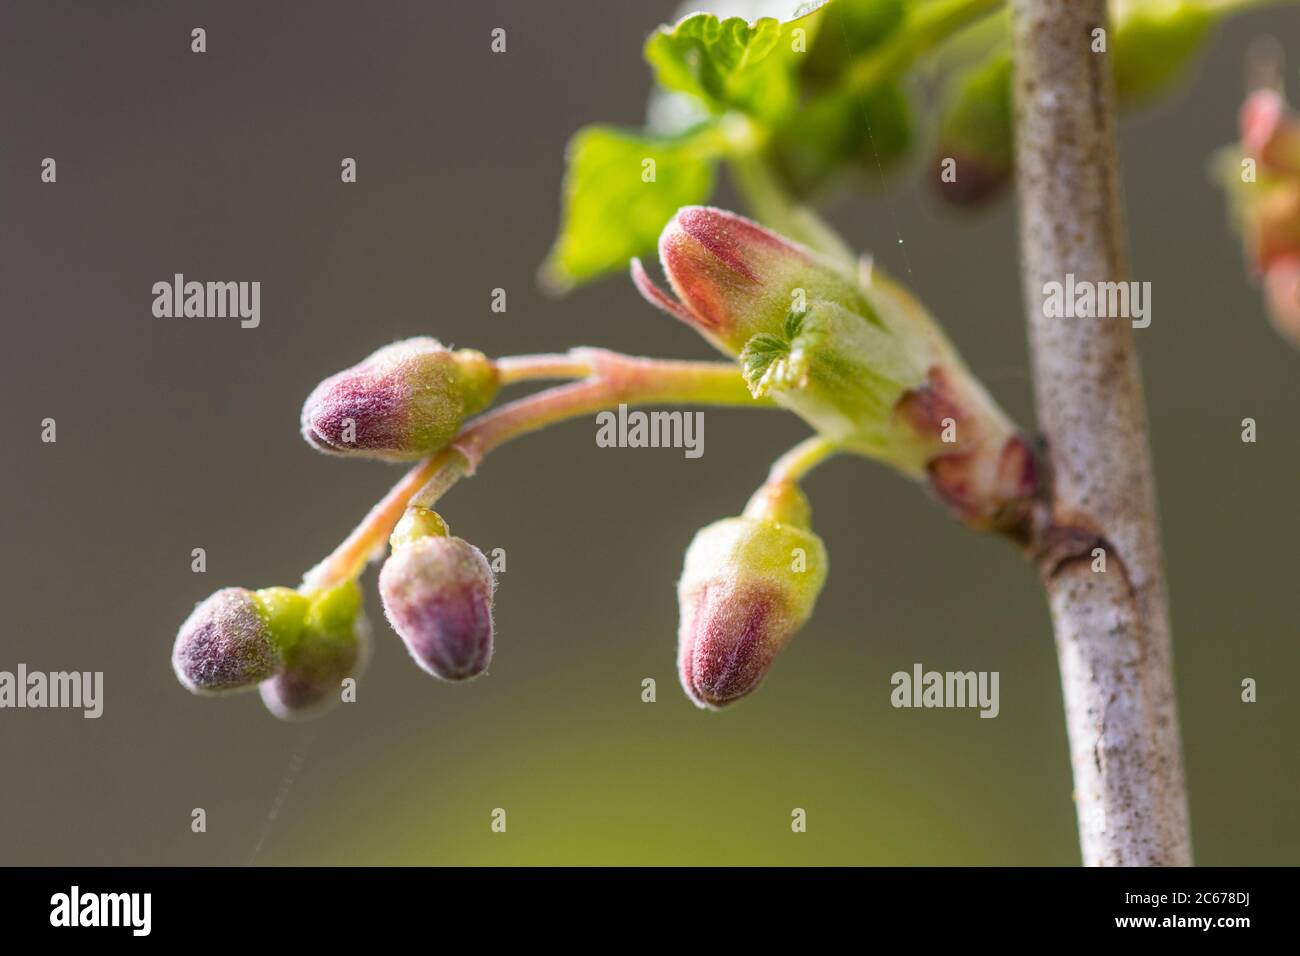 Black Currant flower buds Stock Photo